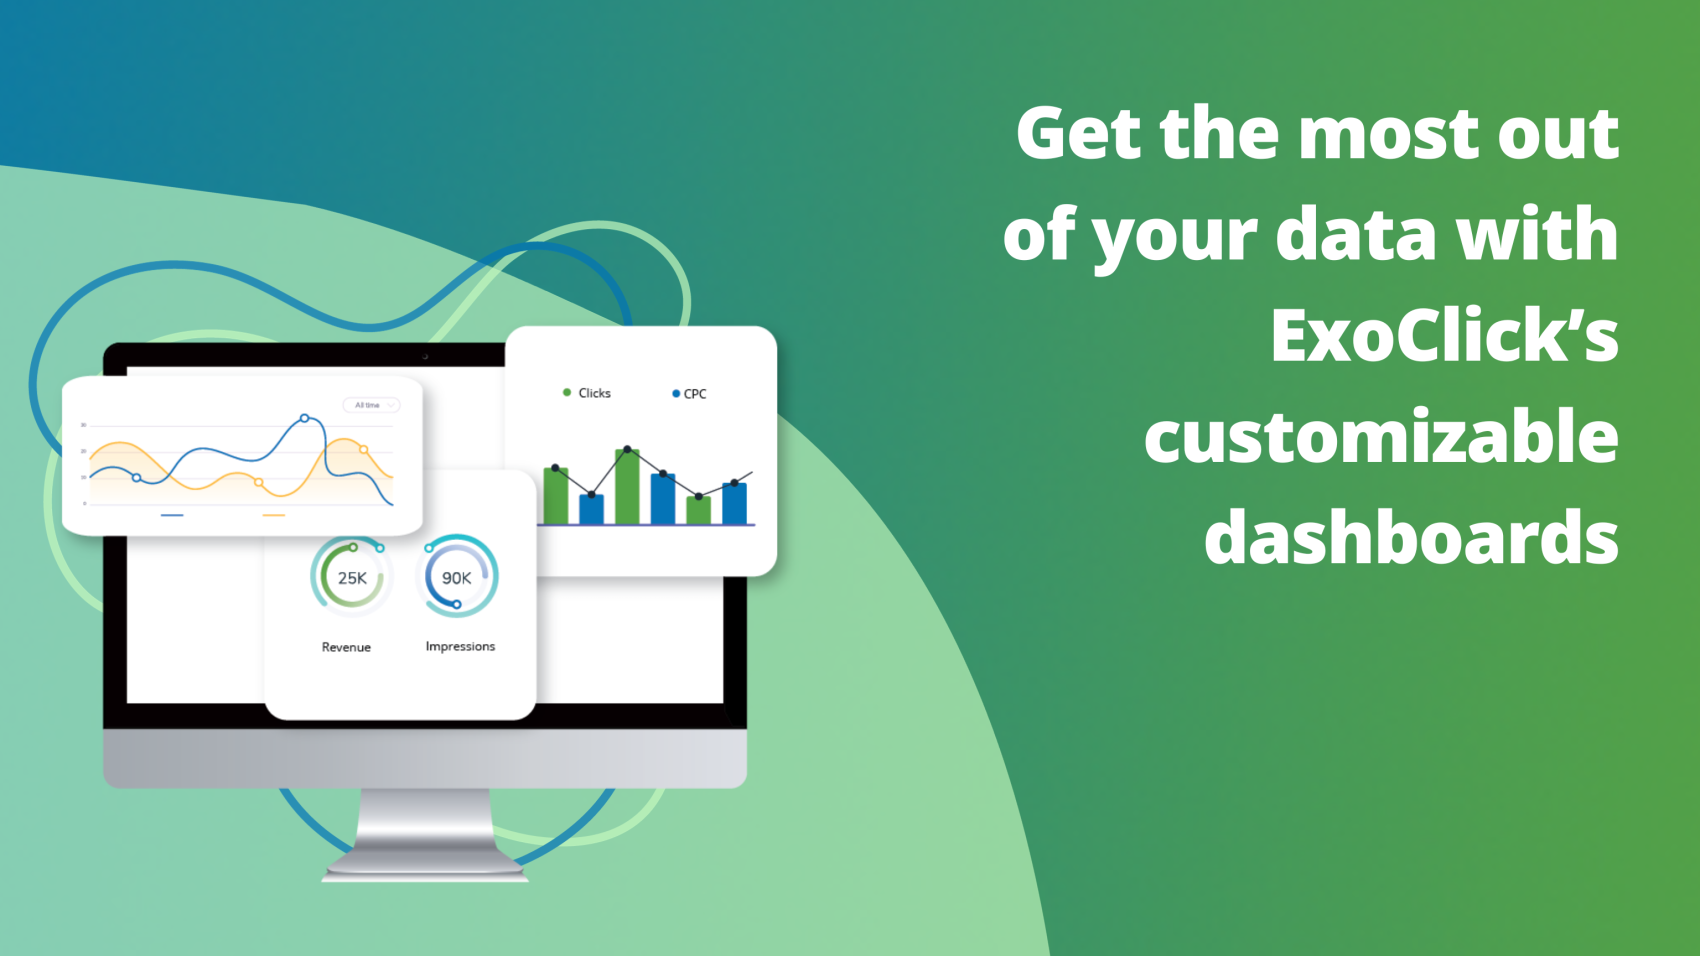 Get the most out of your data with ExoClick’s customizable dashboards